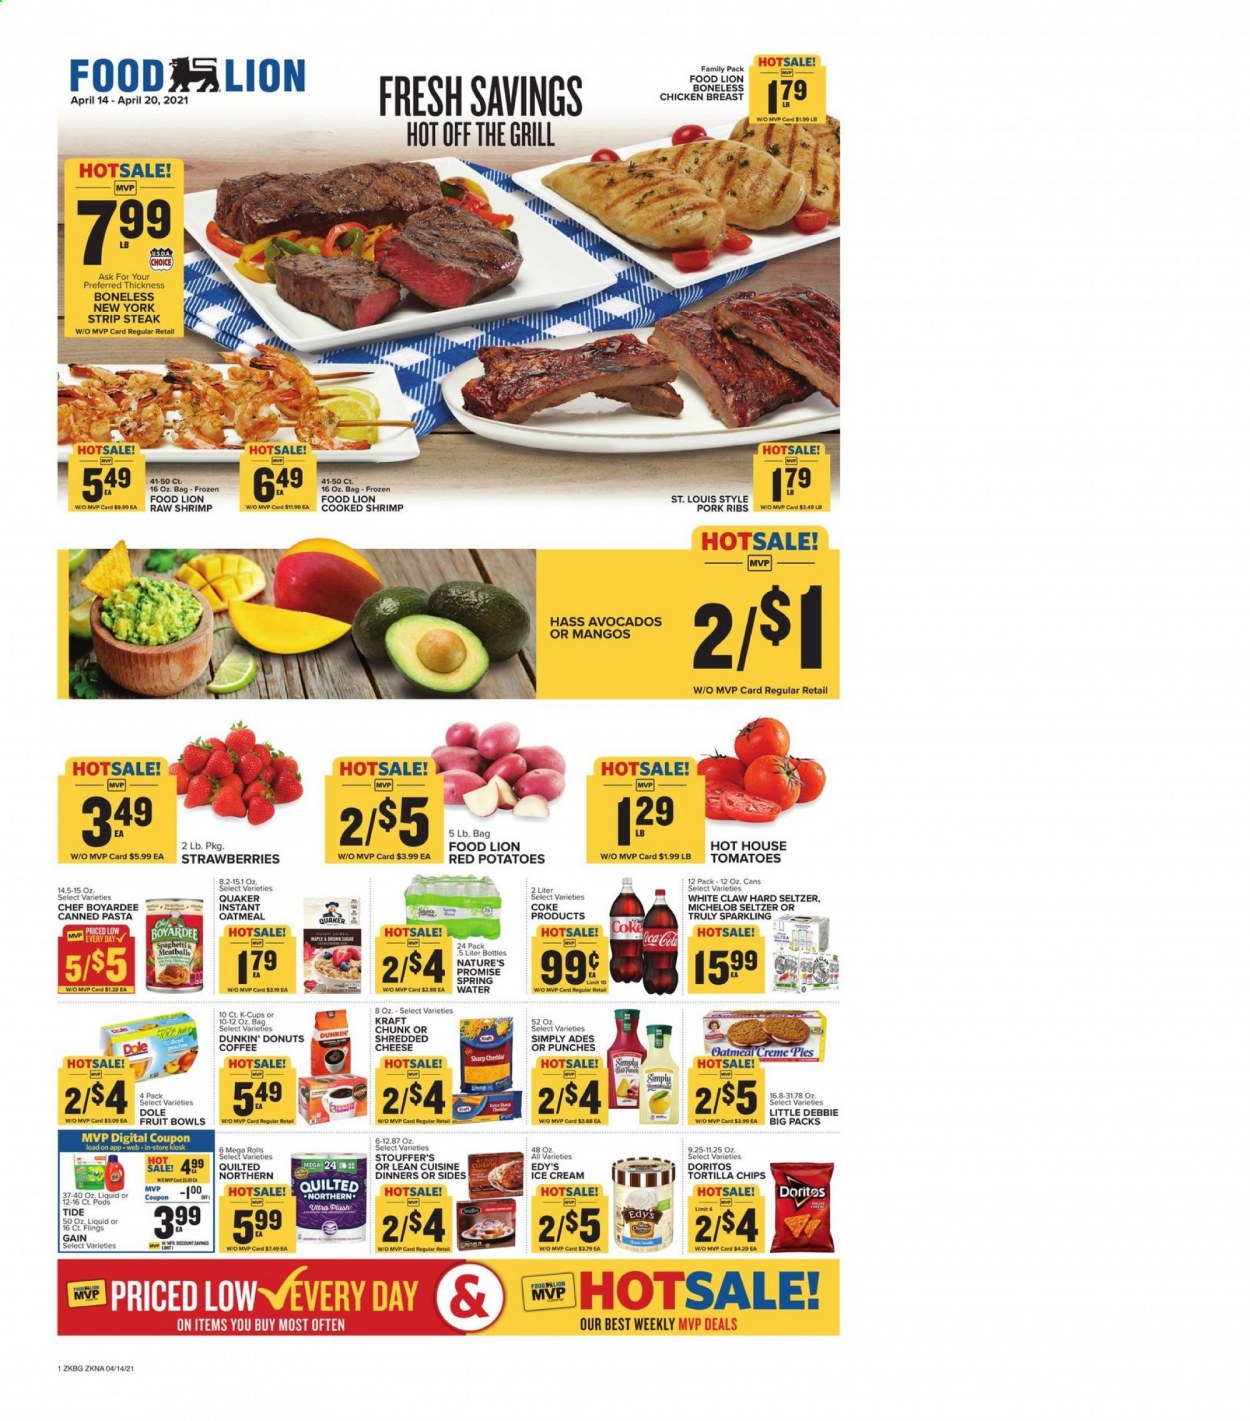 thumbnail - Food Lion Flyer - 04/14/2021 - 04/20/2021 - Sales products - Michelob, Nature’s Promise, Dunkin' Donuts, tomatoes, potatoes, Dole, red potatoes, avocado, mango, strawberries, shrimps, pasta, Quaker, Lean Cuisine, Kraft®, shredded cheese, ice cream, Stouffer's, Doritos, tortilla chips, oatmeal, Chef Boyardee, Coca-Cola, seltzer water, coffee, coffee capsules, K-Cups, White Claw, Hard Seltzer, TRULY, beer, chicken breasts, beef meat, steak, striploin steak, pork meat, pork ribs, Quilted Northern, Gain, Tide, Sharp. Page 1.